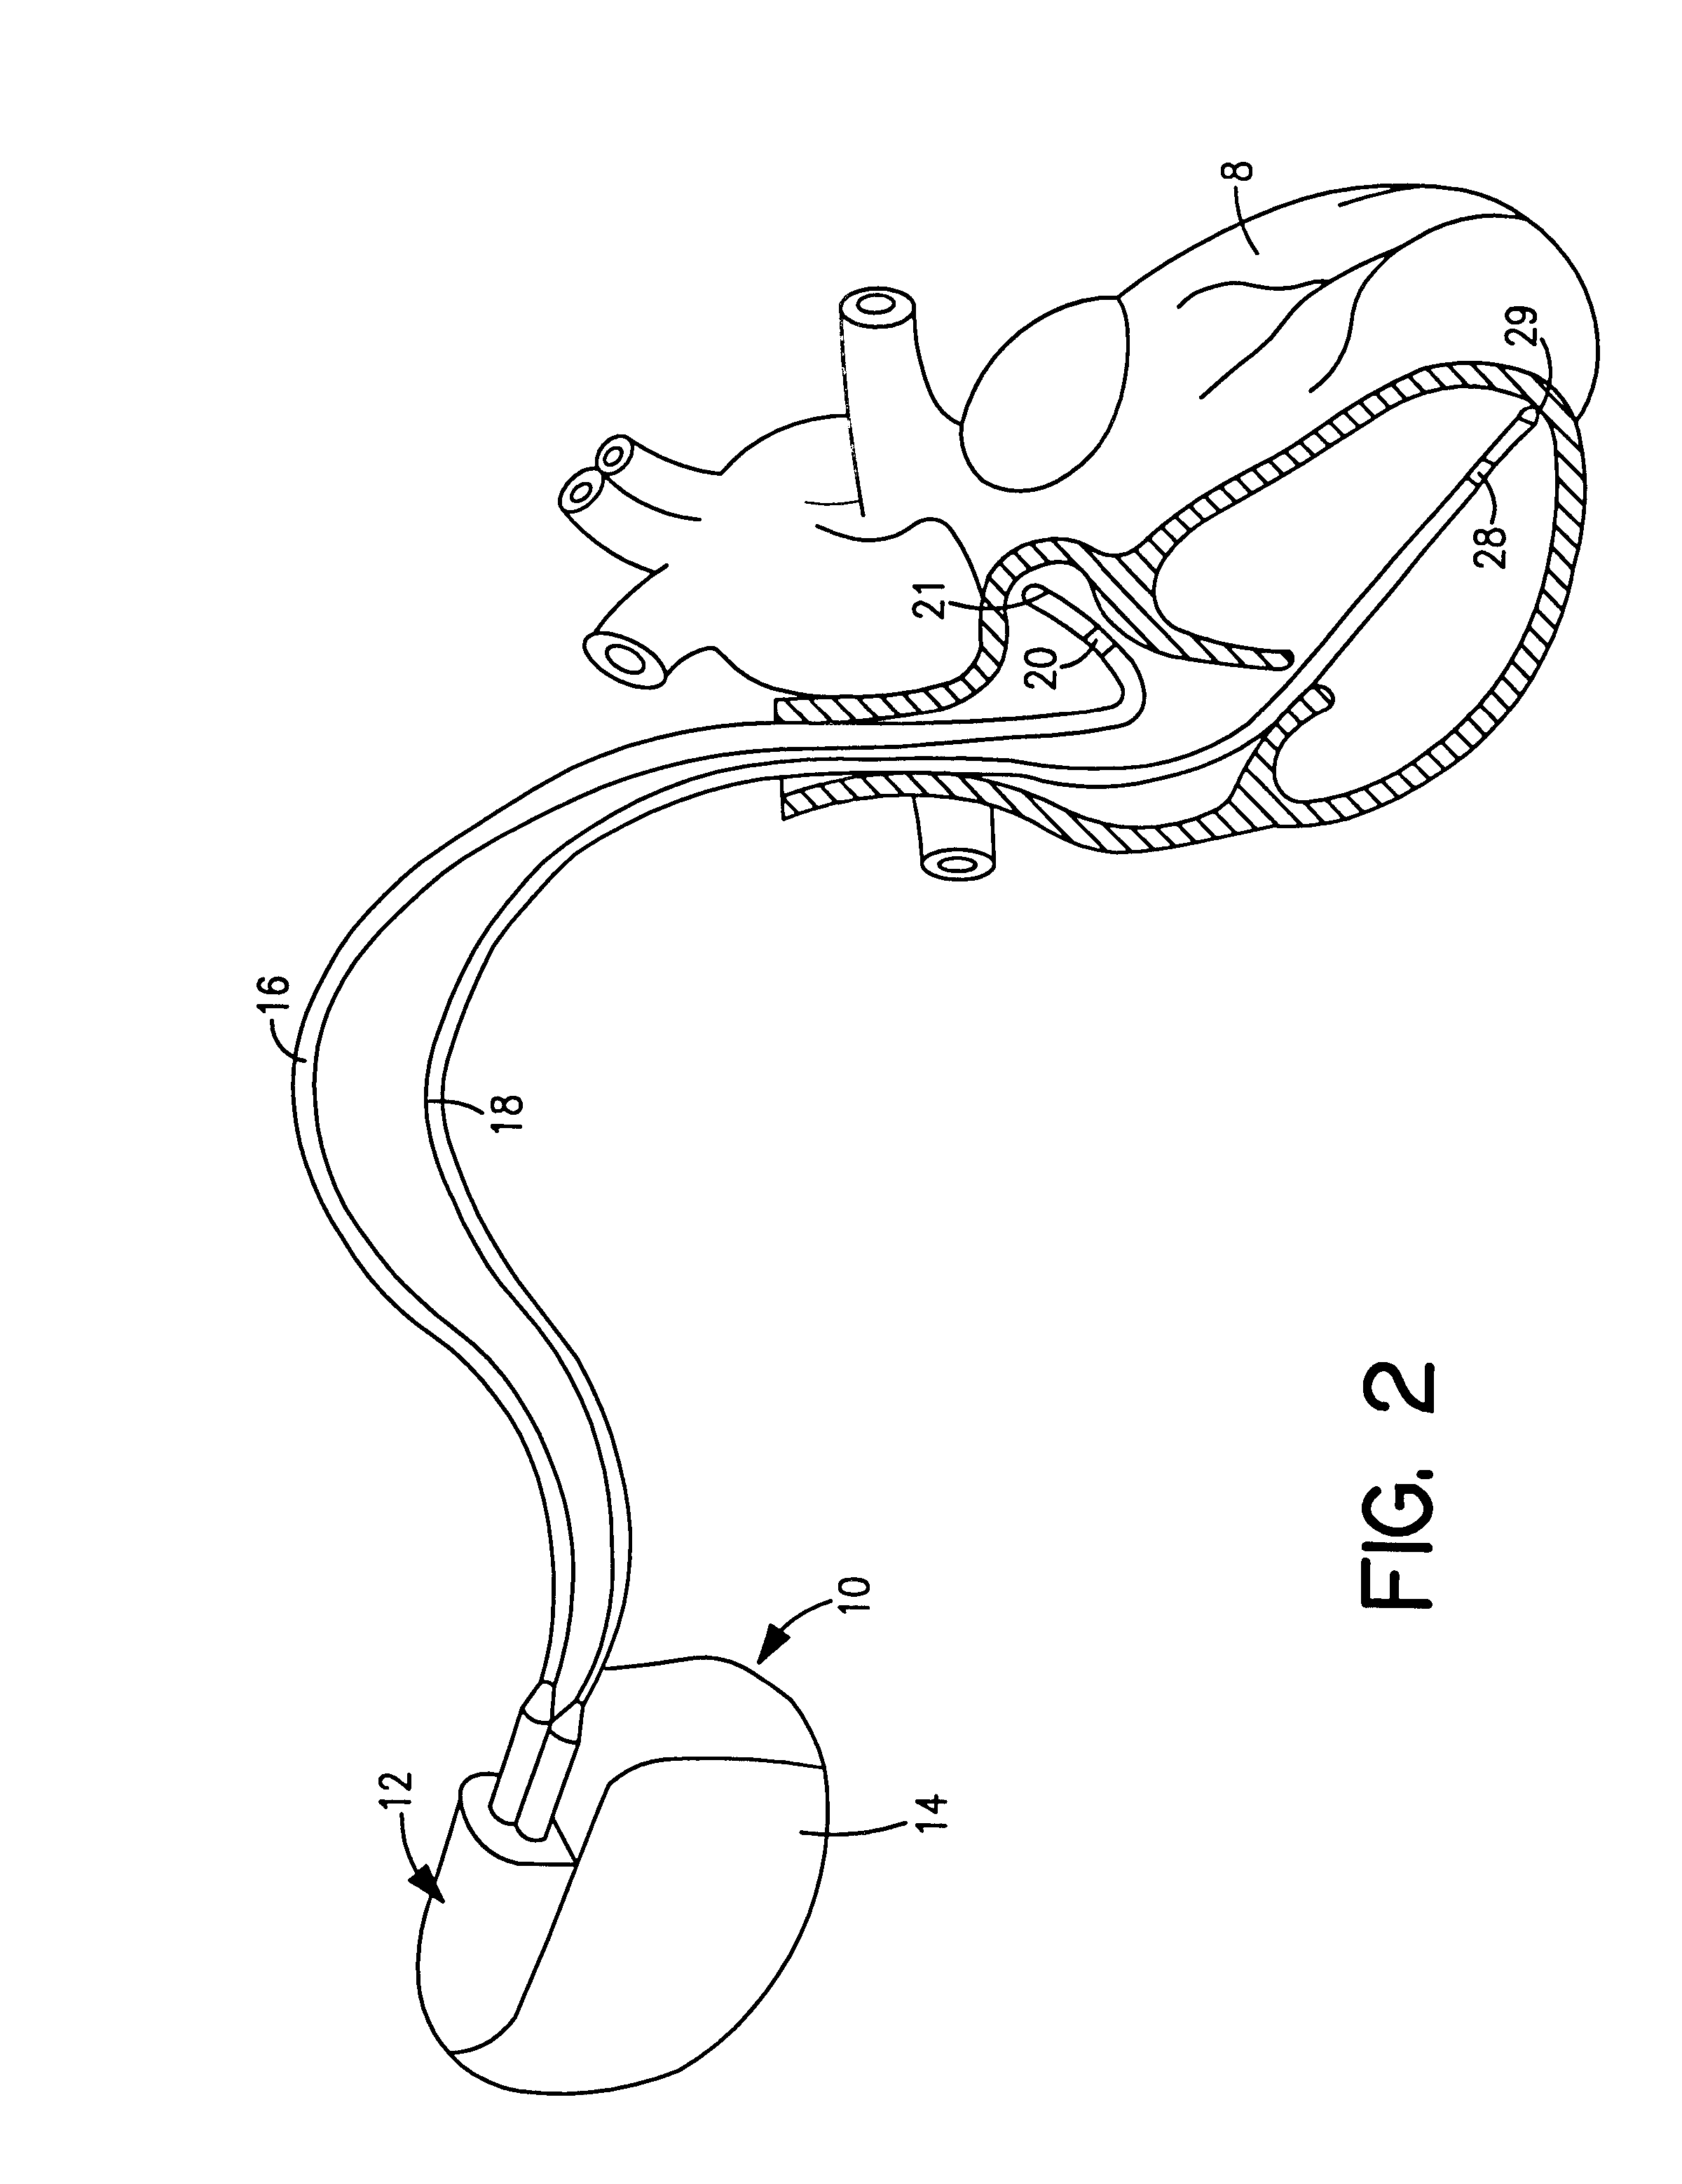 Implantable medical device programmers having headset video and methods of using same